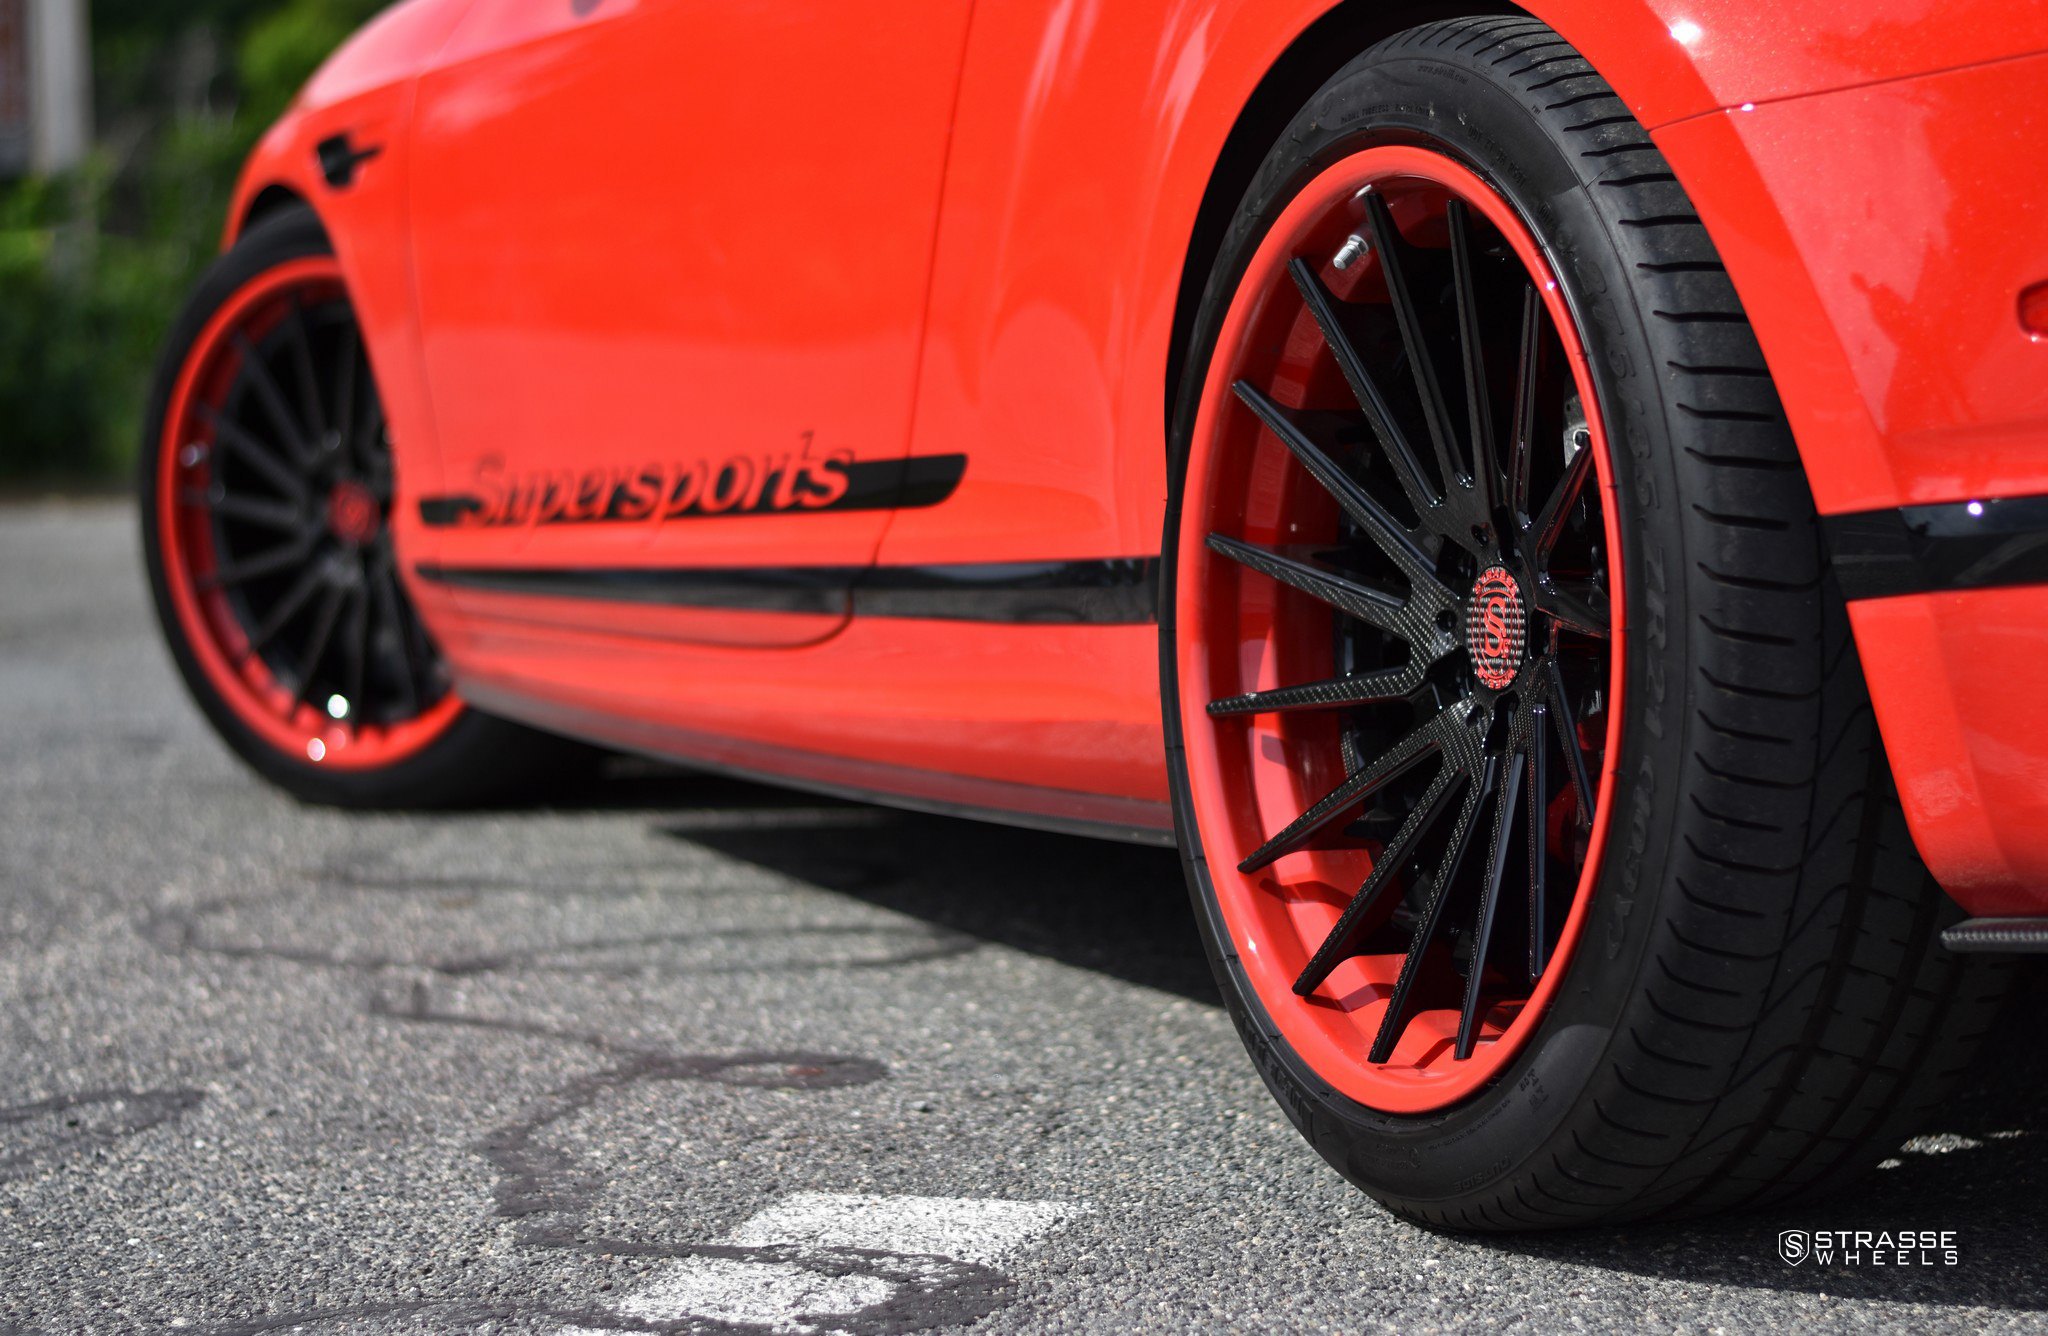 Carbon Fiber Strasse Wheels on Red Bentley Continental - Photo by Strasse Wheels